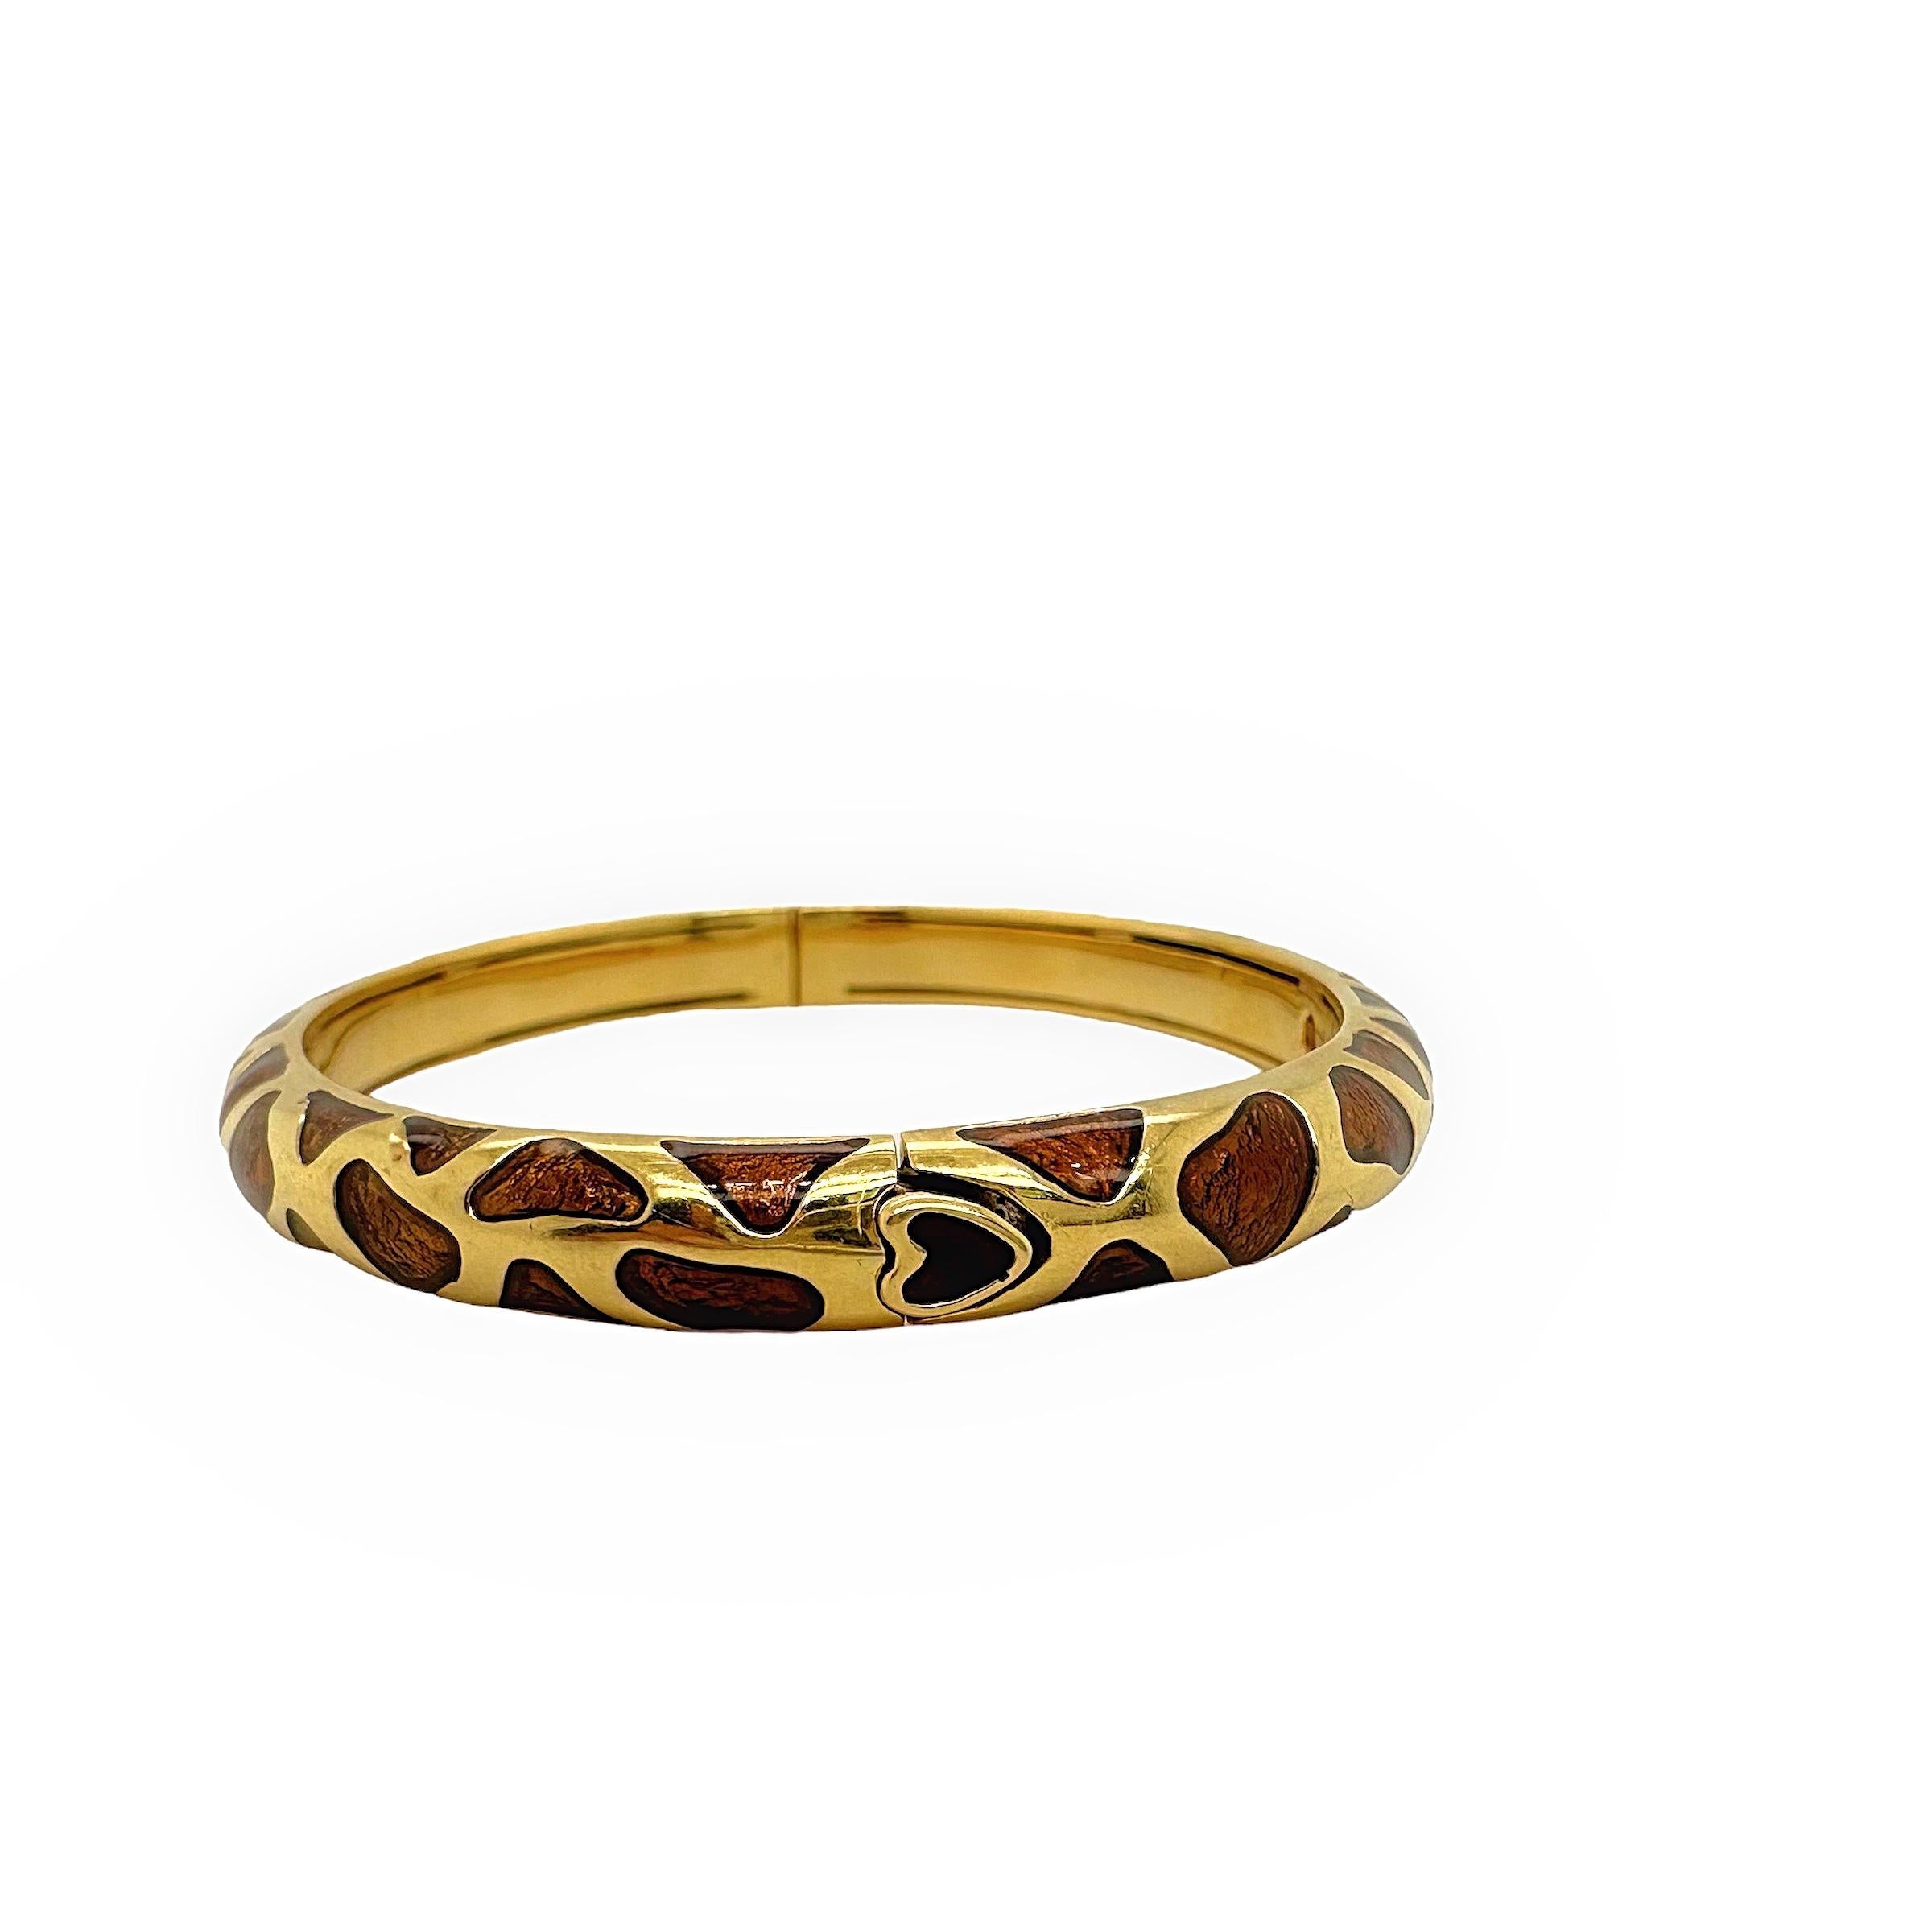 Roberto Coin Safarin Giraffe Bangle Bracelet
Style:   Bangle
Metal:  18kt Yellow Gold & Brown Enamel
Size:  6.5 inches - measured from the inside circumference
Width:  12 mm
Hallmark:  Roberto Coin Ruby
Includes:   Elegant Bracelet Box
Retail: 